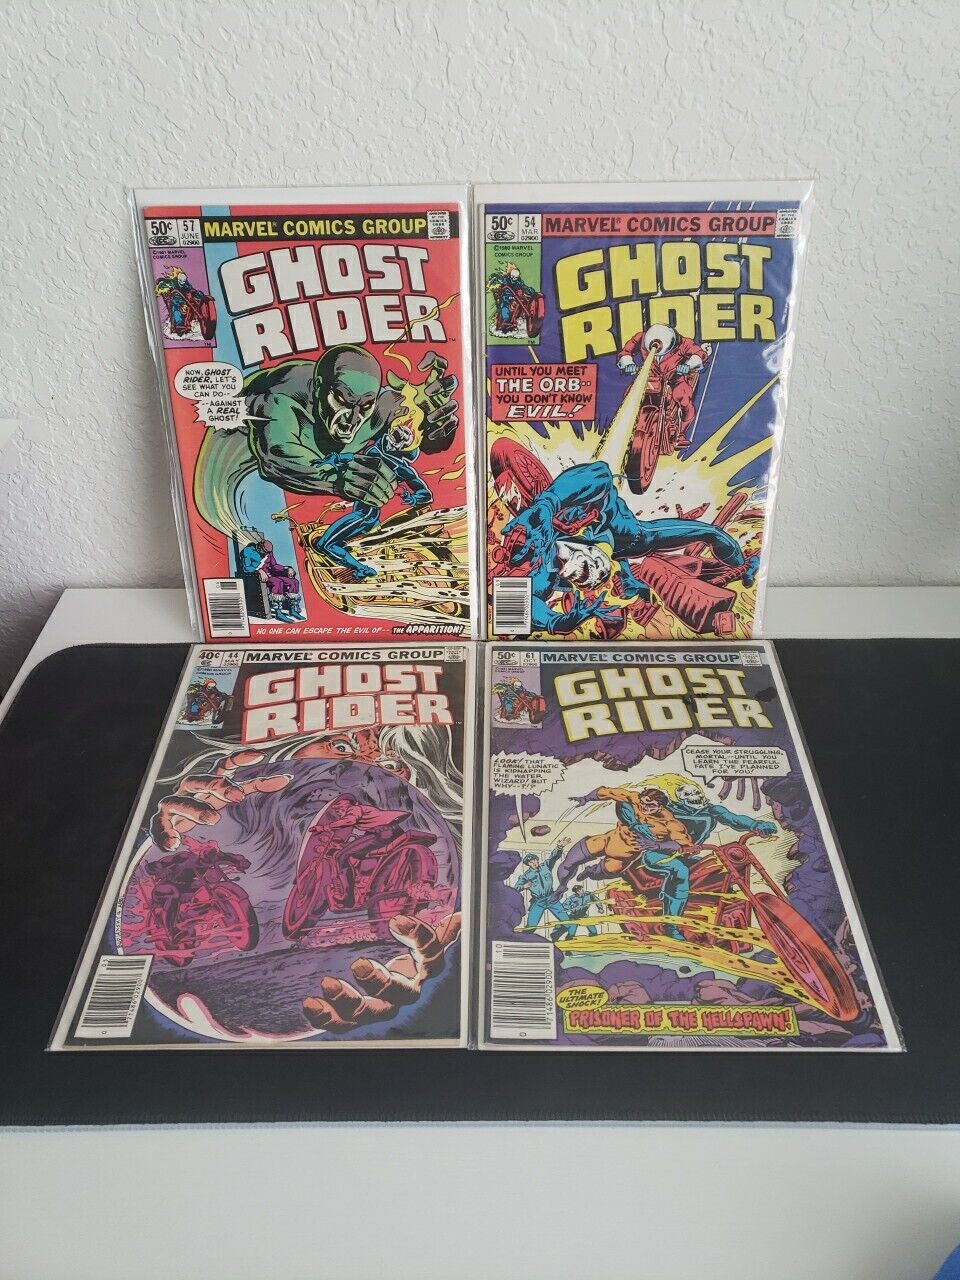 Ghost Rider Lot of 4 Vintage Marvel Comics (1980-81) Issues: 44, 54, 57 & 61.